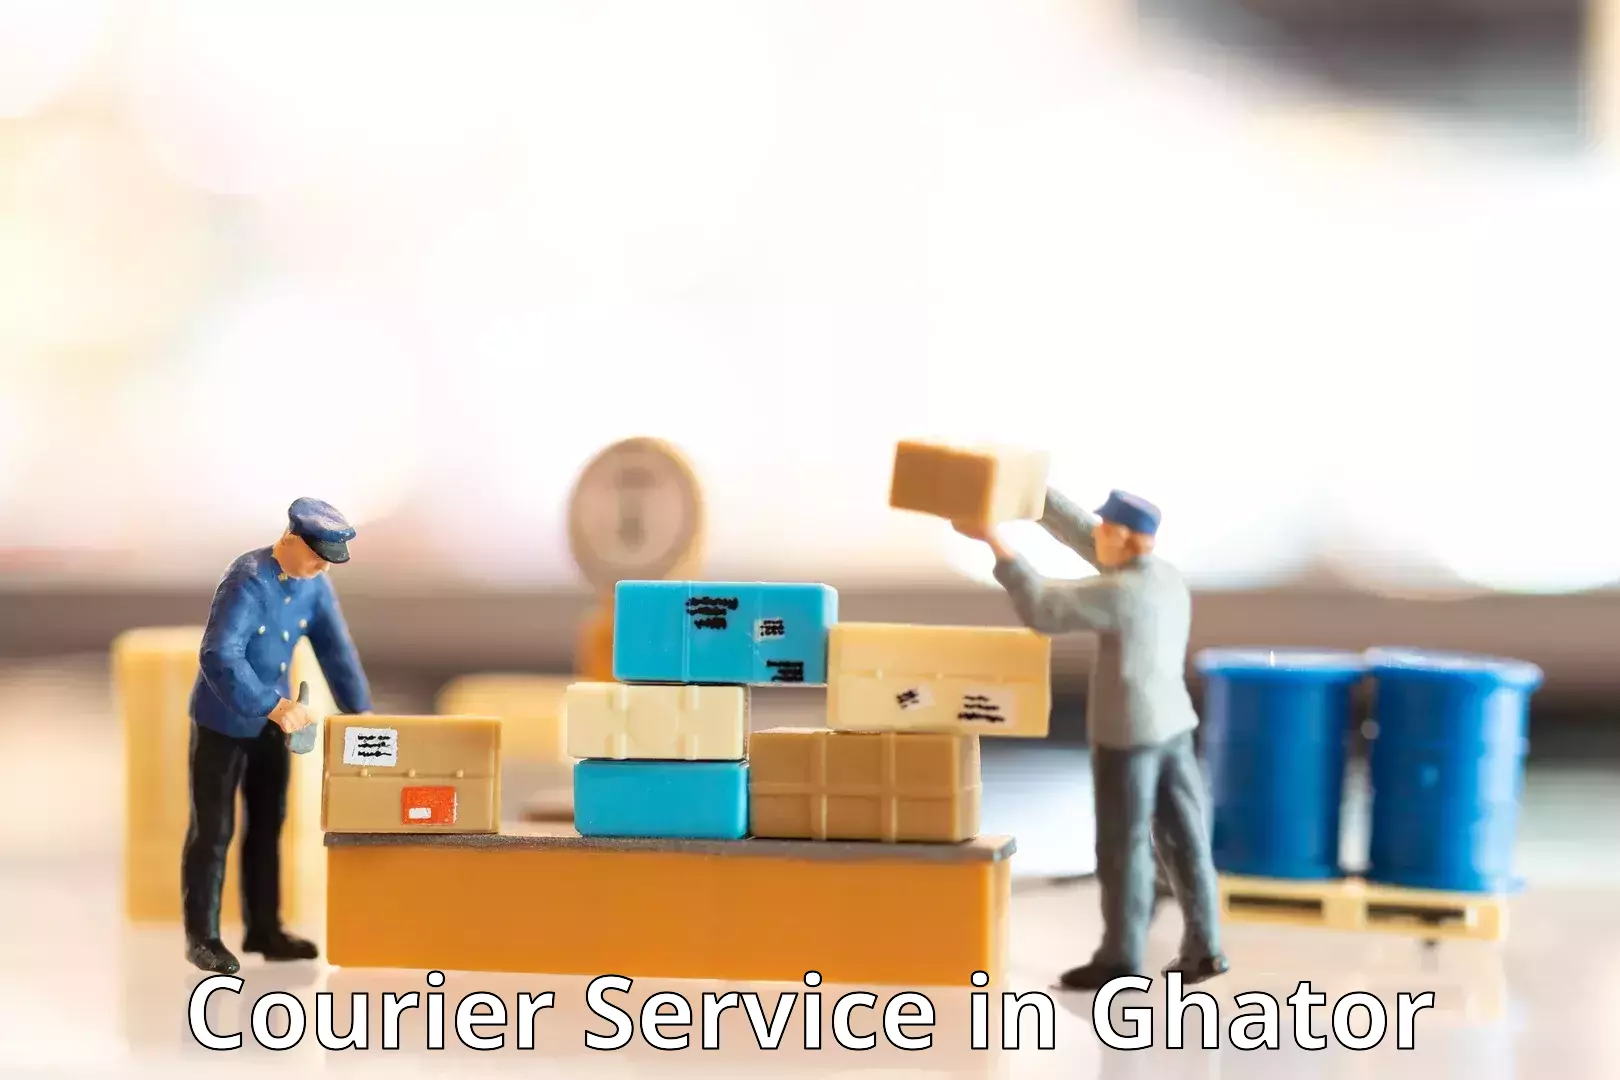 Budget-friendly shipping in Ghator